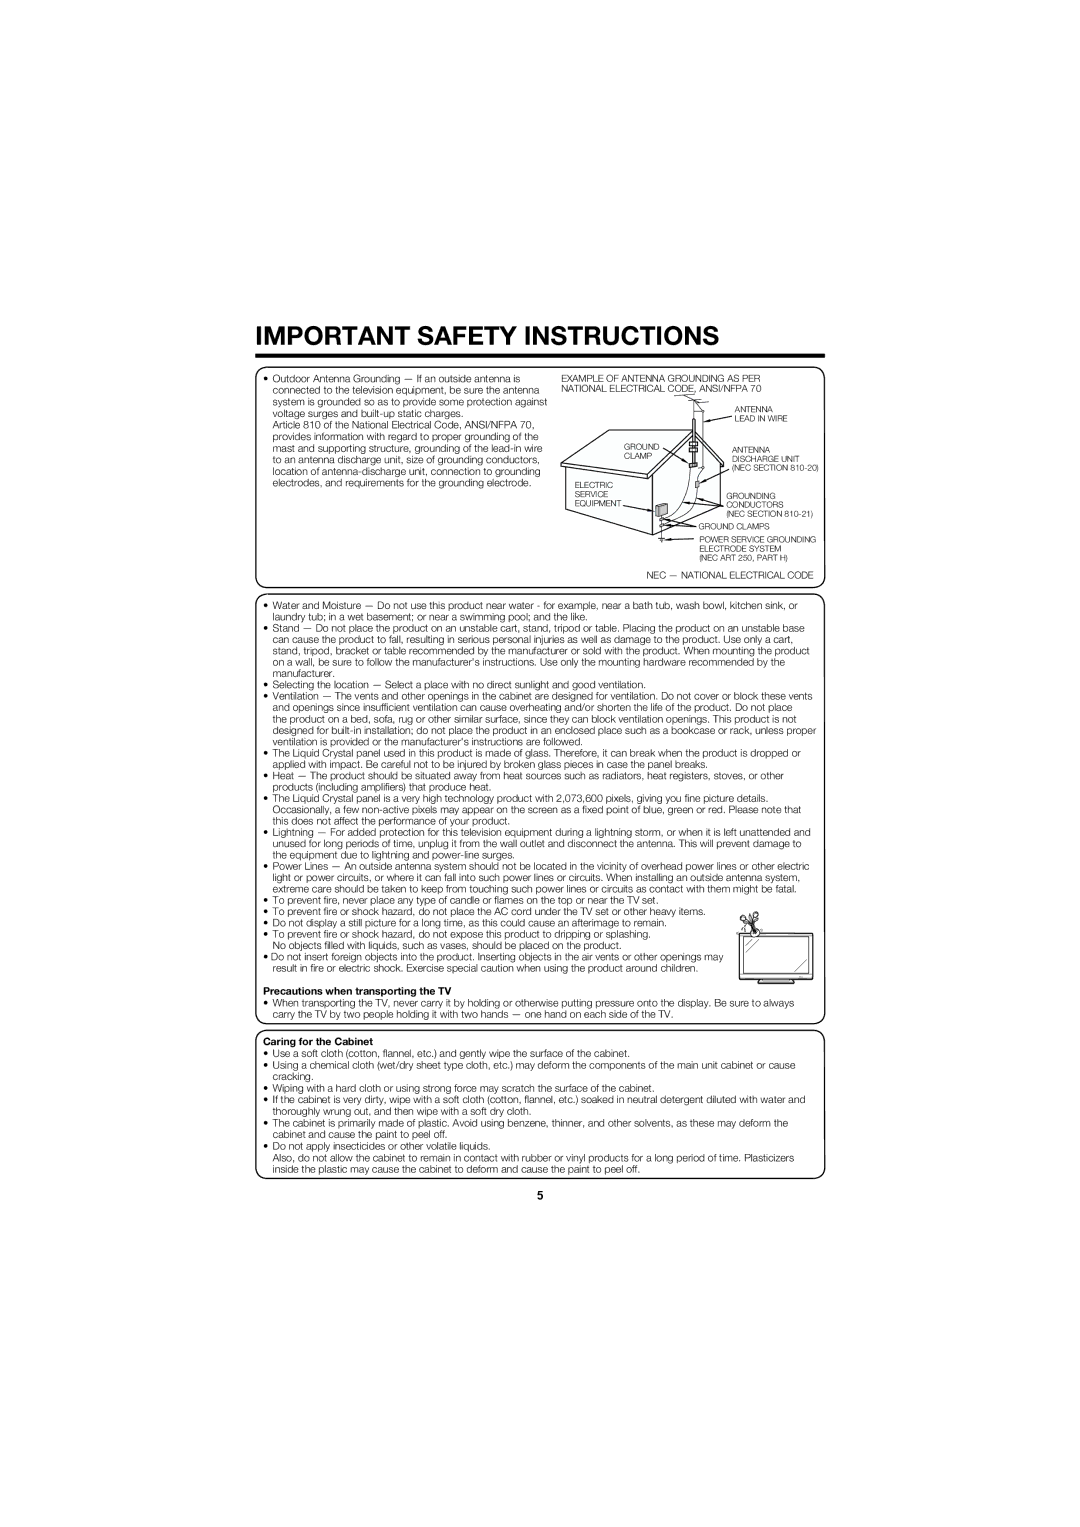 Sharp LC-40D68UT operation manual Precautions when transporting the TV, Caring for the Cabinet 